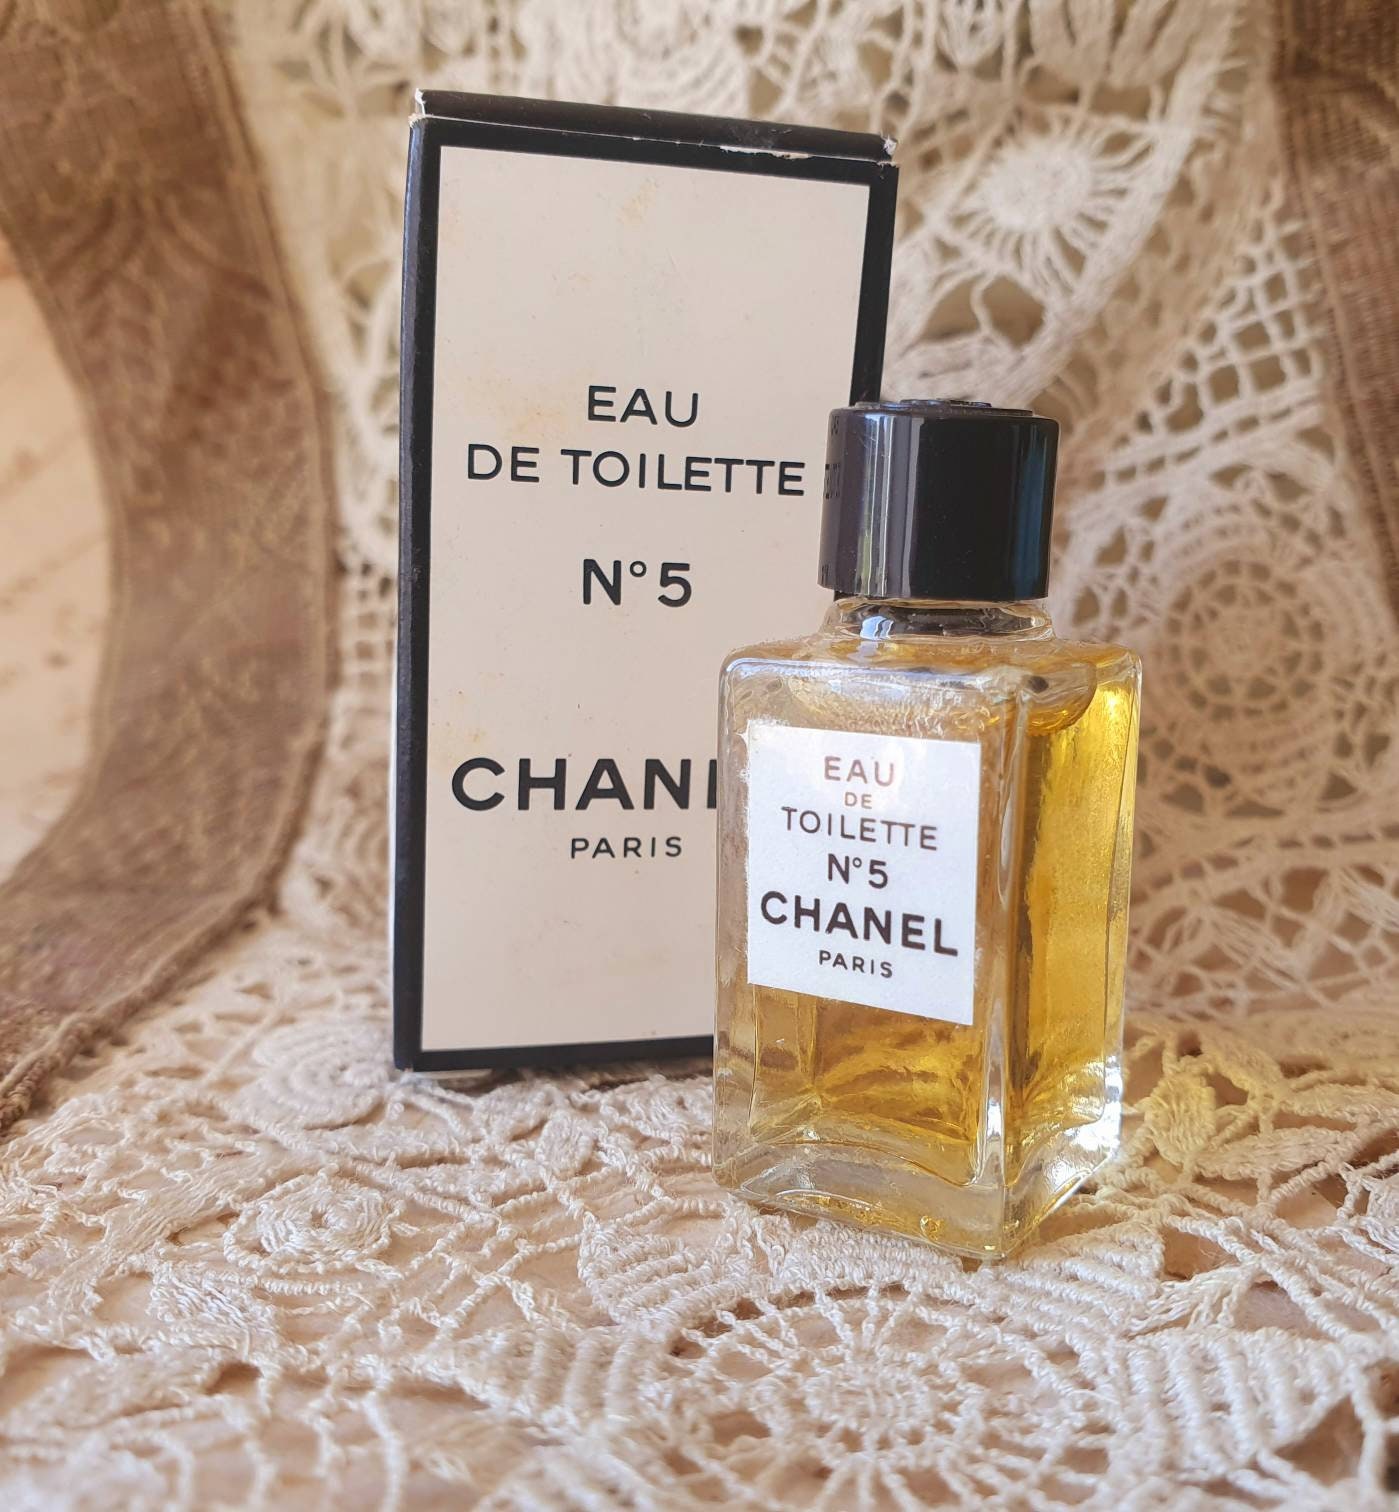 Gift Set of perfume Chanel 5 in 1 eau de toilette Chanel No. 5 No. 19 Coco  Chanel miss as a gift 5 in 1 - AliExpress